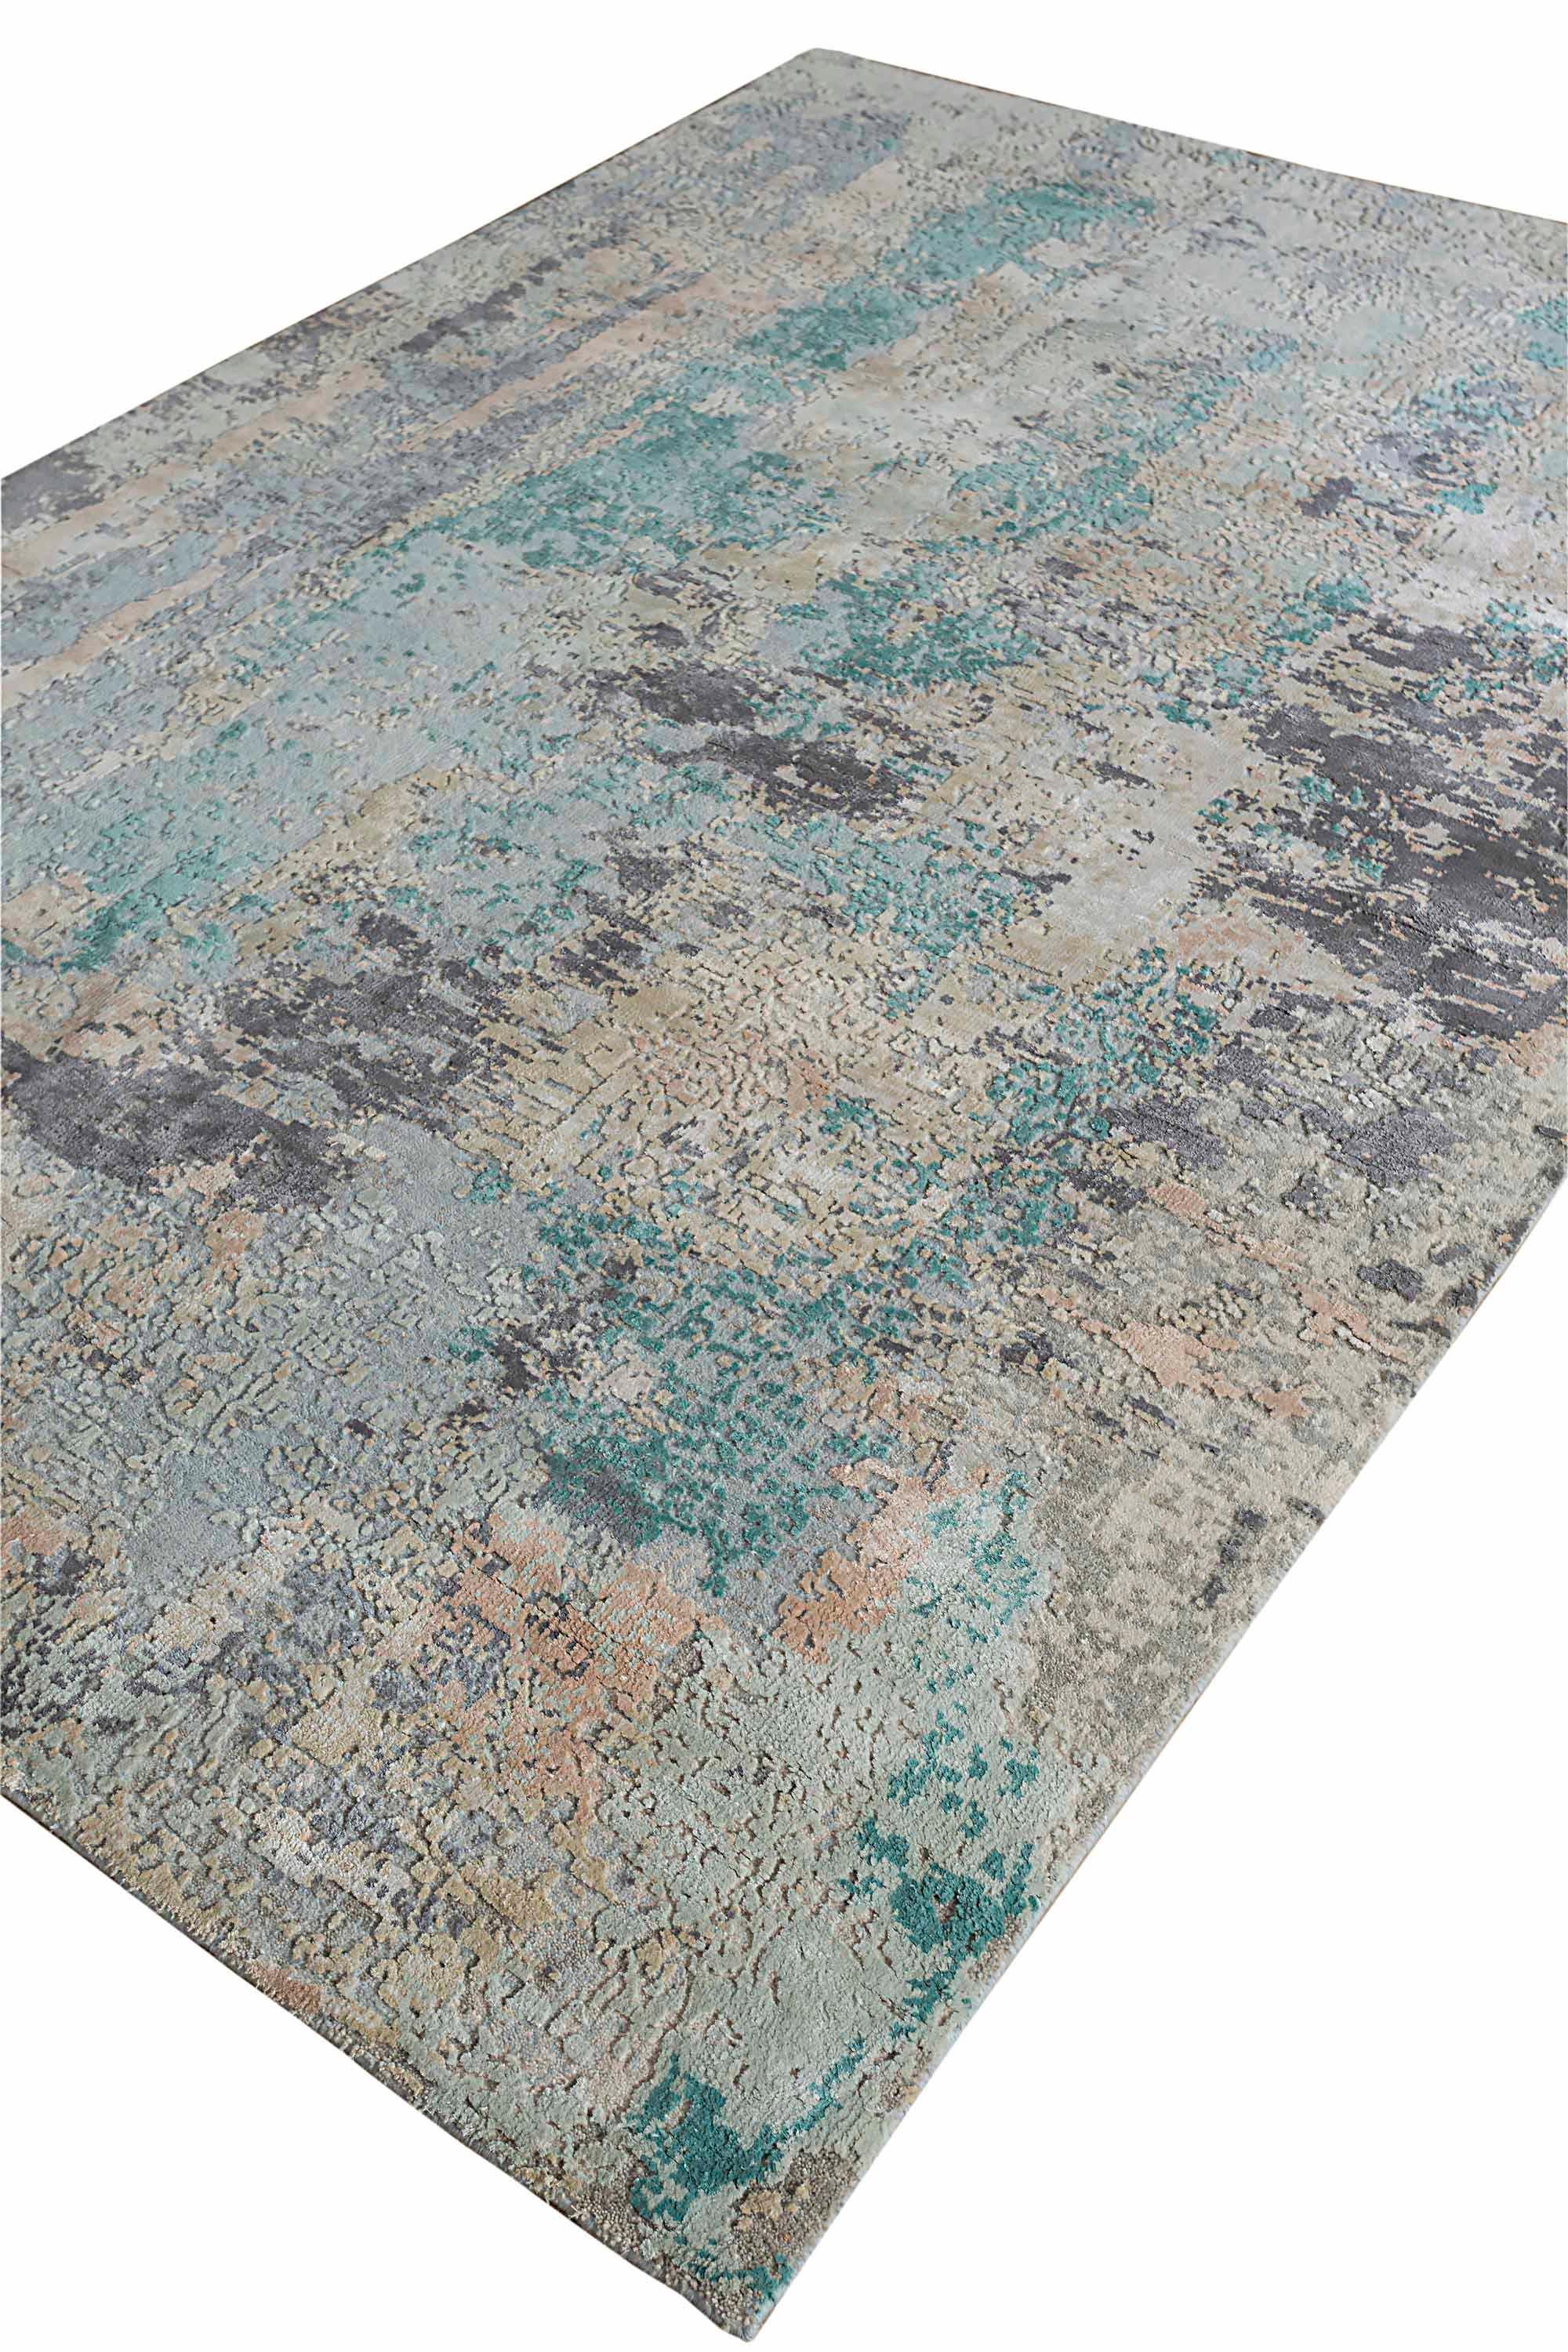 New area rug handwoven from the finest sheep’s wool and real silk. It’s colored with all-natural vegetable dyes that are safe for humans and pets. It features beautiful modern watercolor art design patterns that blend perfectly with contemporary